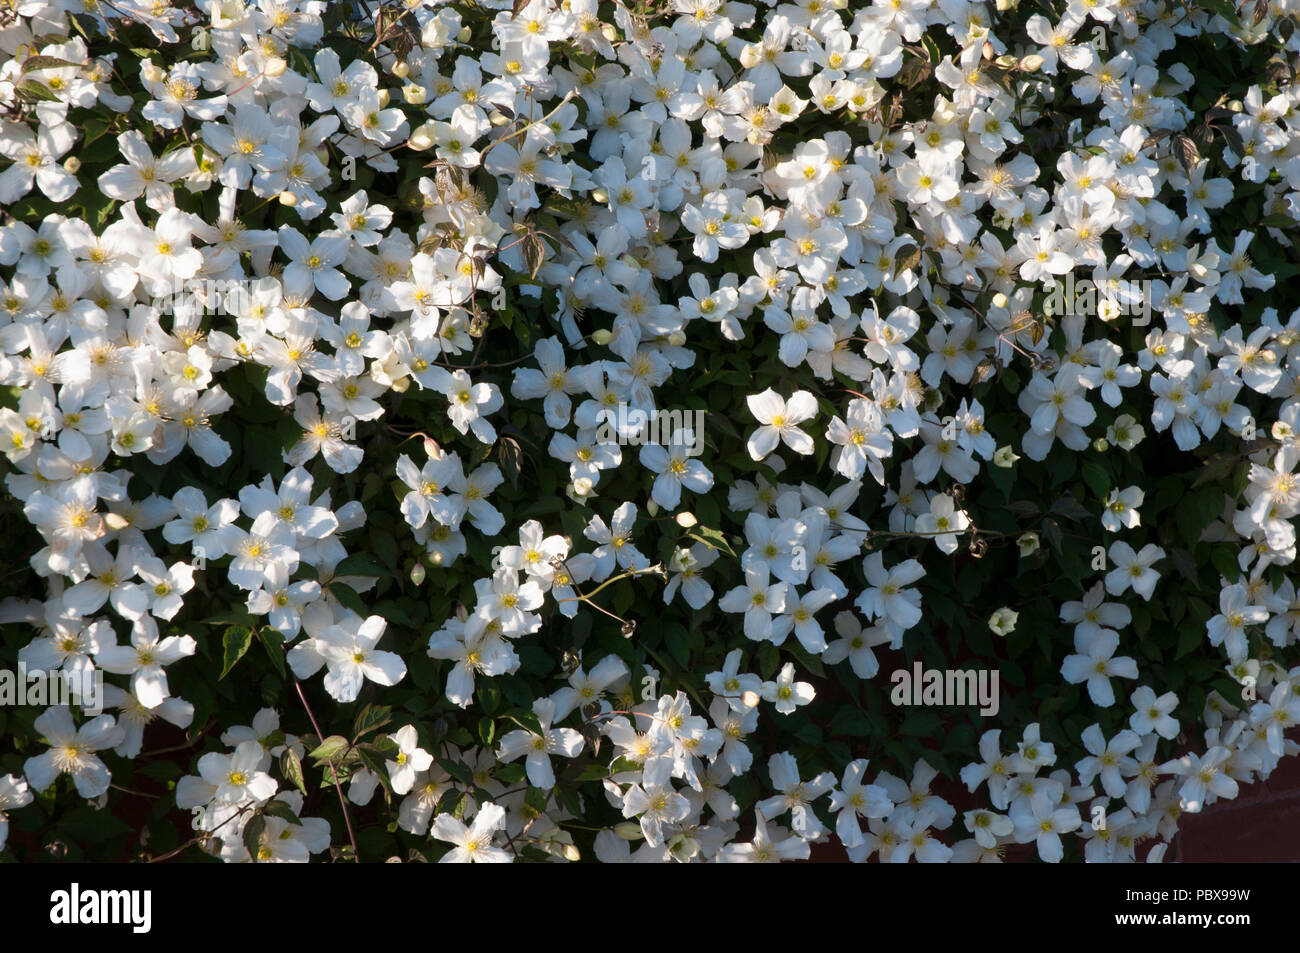 Clematis montana in close up view showing lots of white flowers in spring. Stock Photo